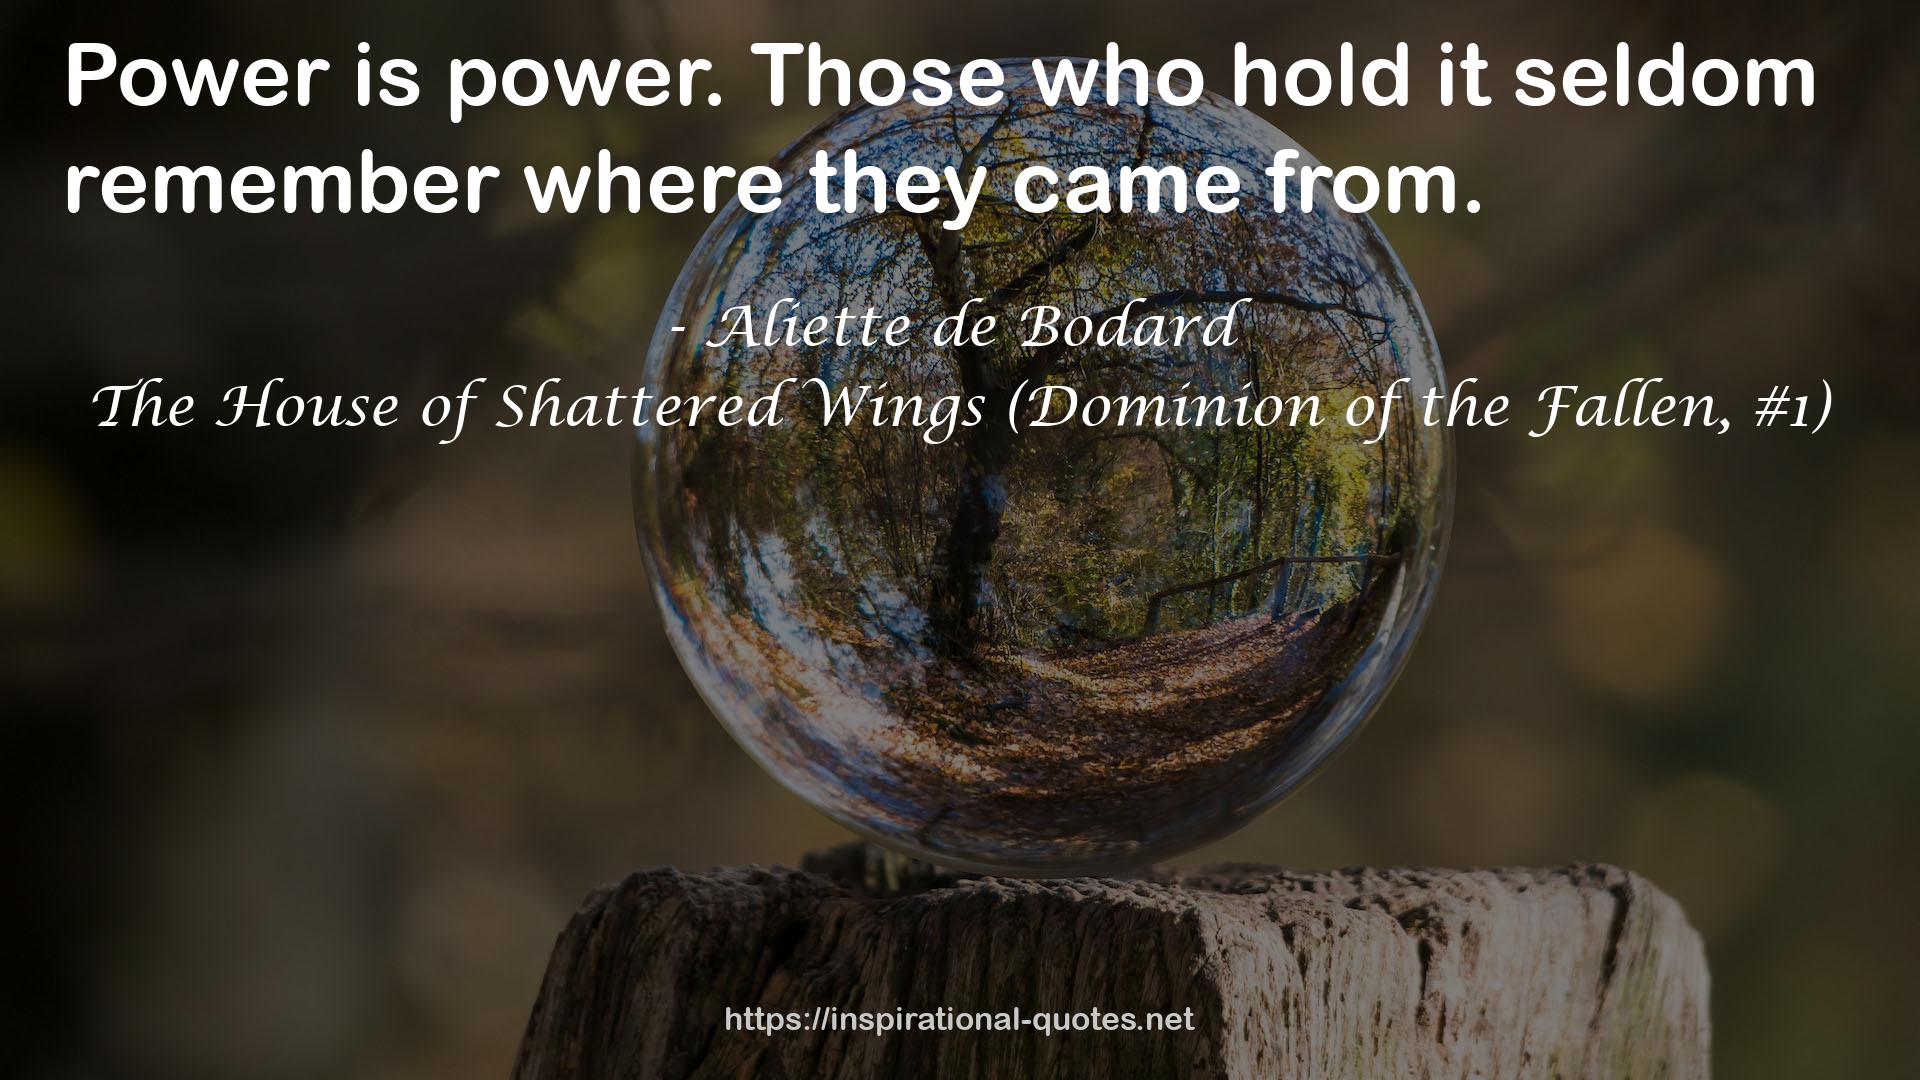 The House of Shattered Wings (Dominion of the Fallen, #1) QUOTES